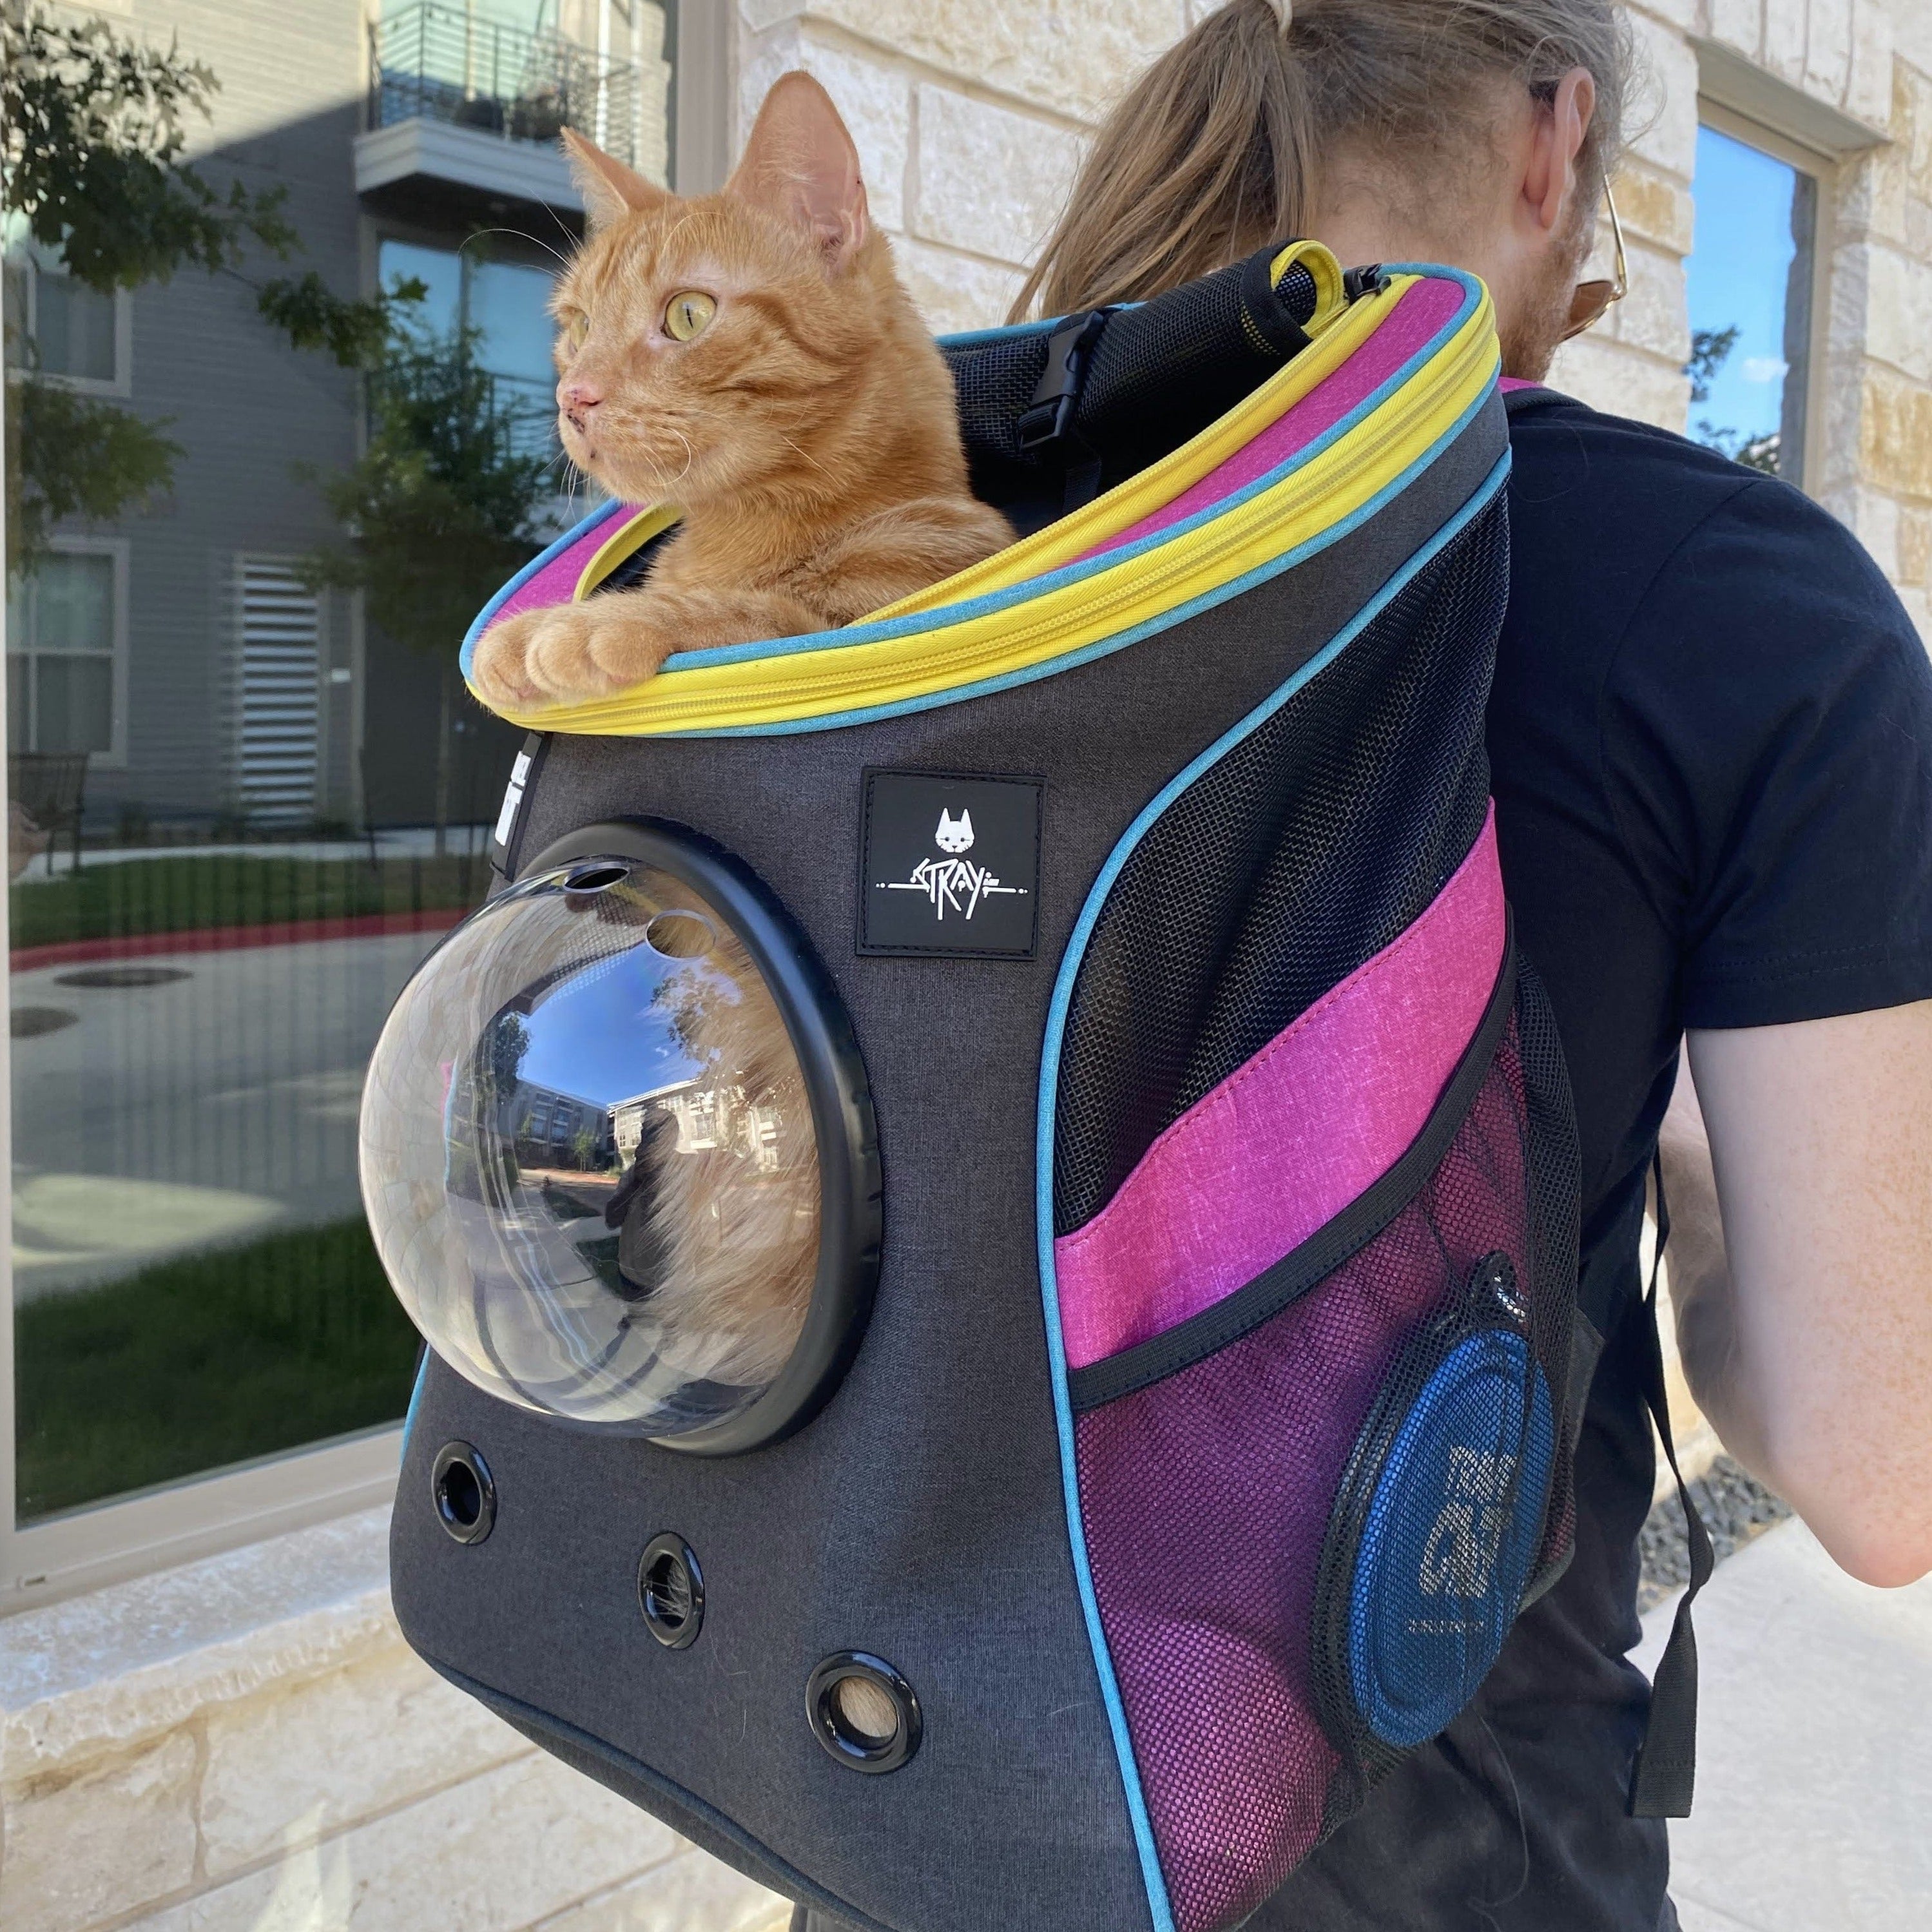 Stray x Travel Cat Backpack - Limited-Edition